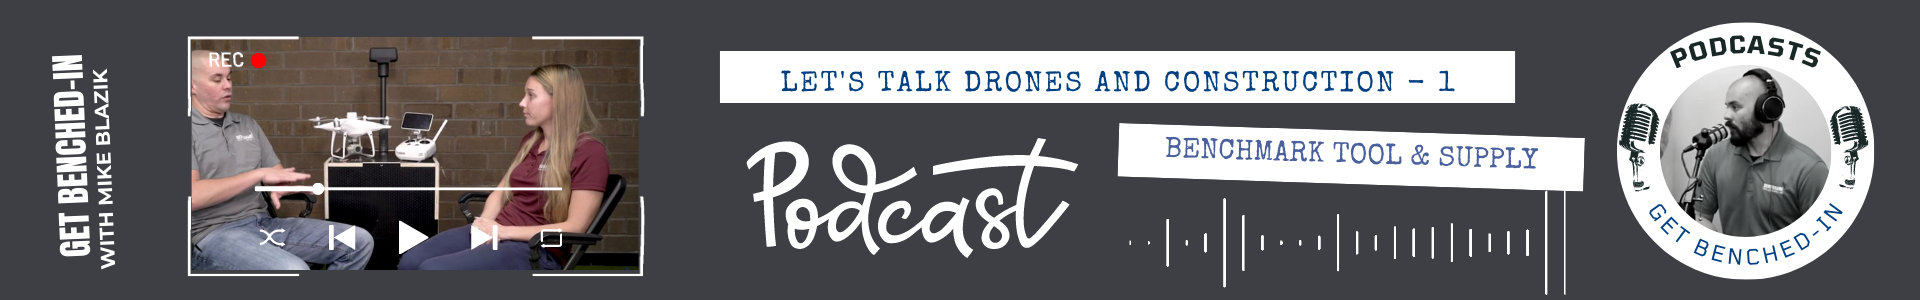 Let's Talk Drones and Construction - 1